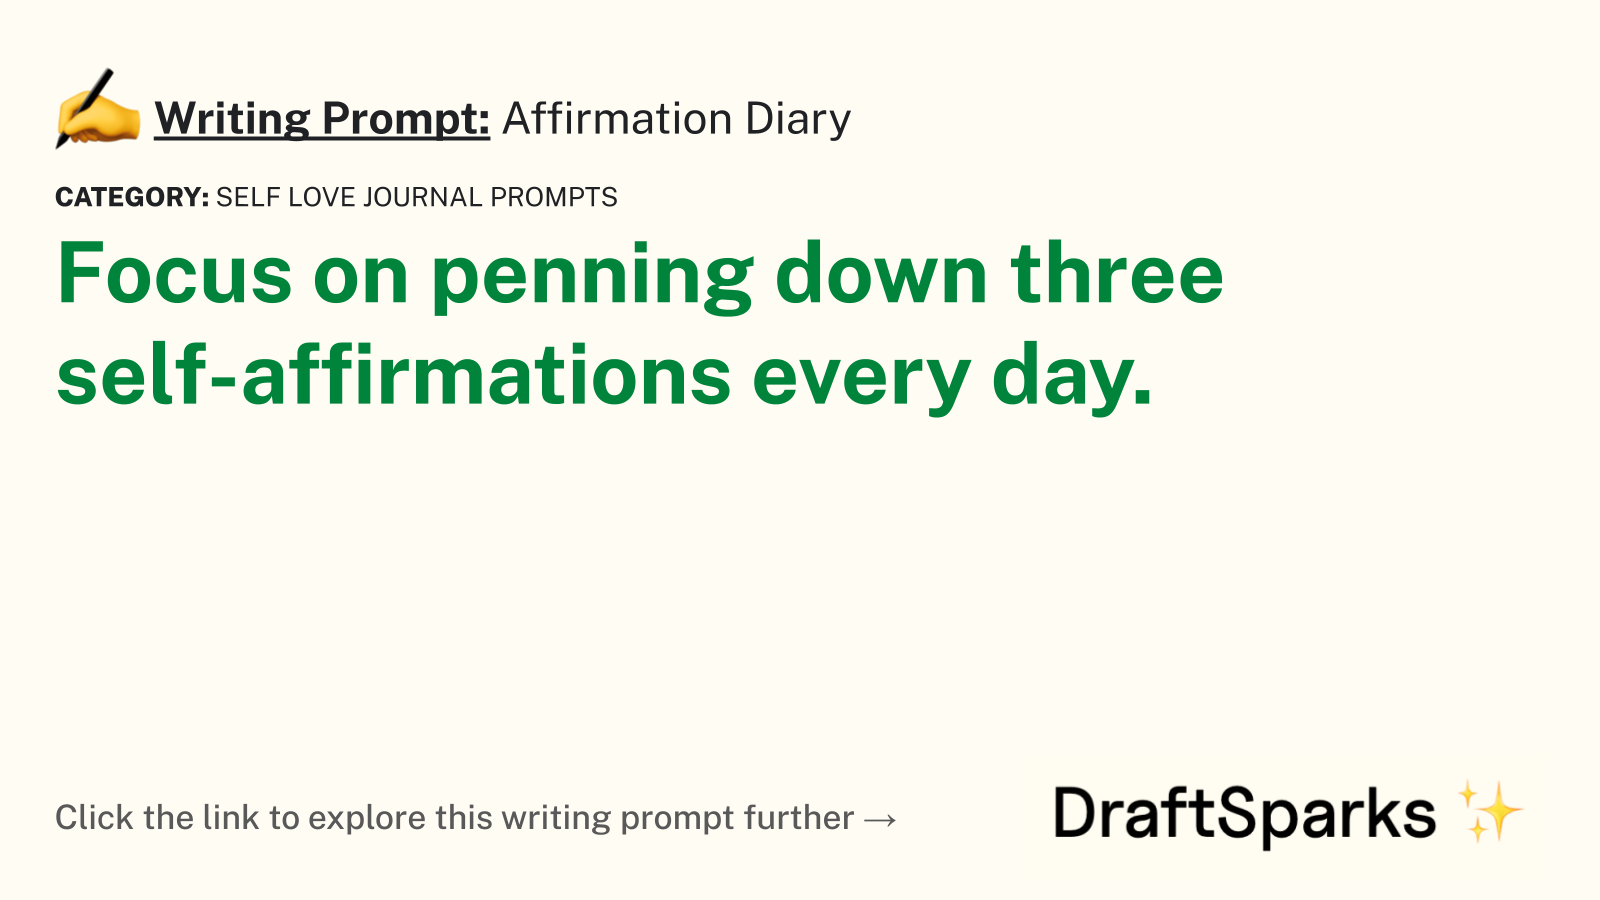 Affirmation Diary